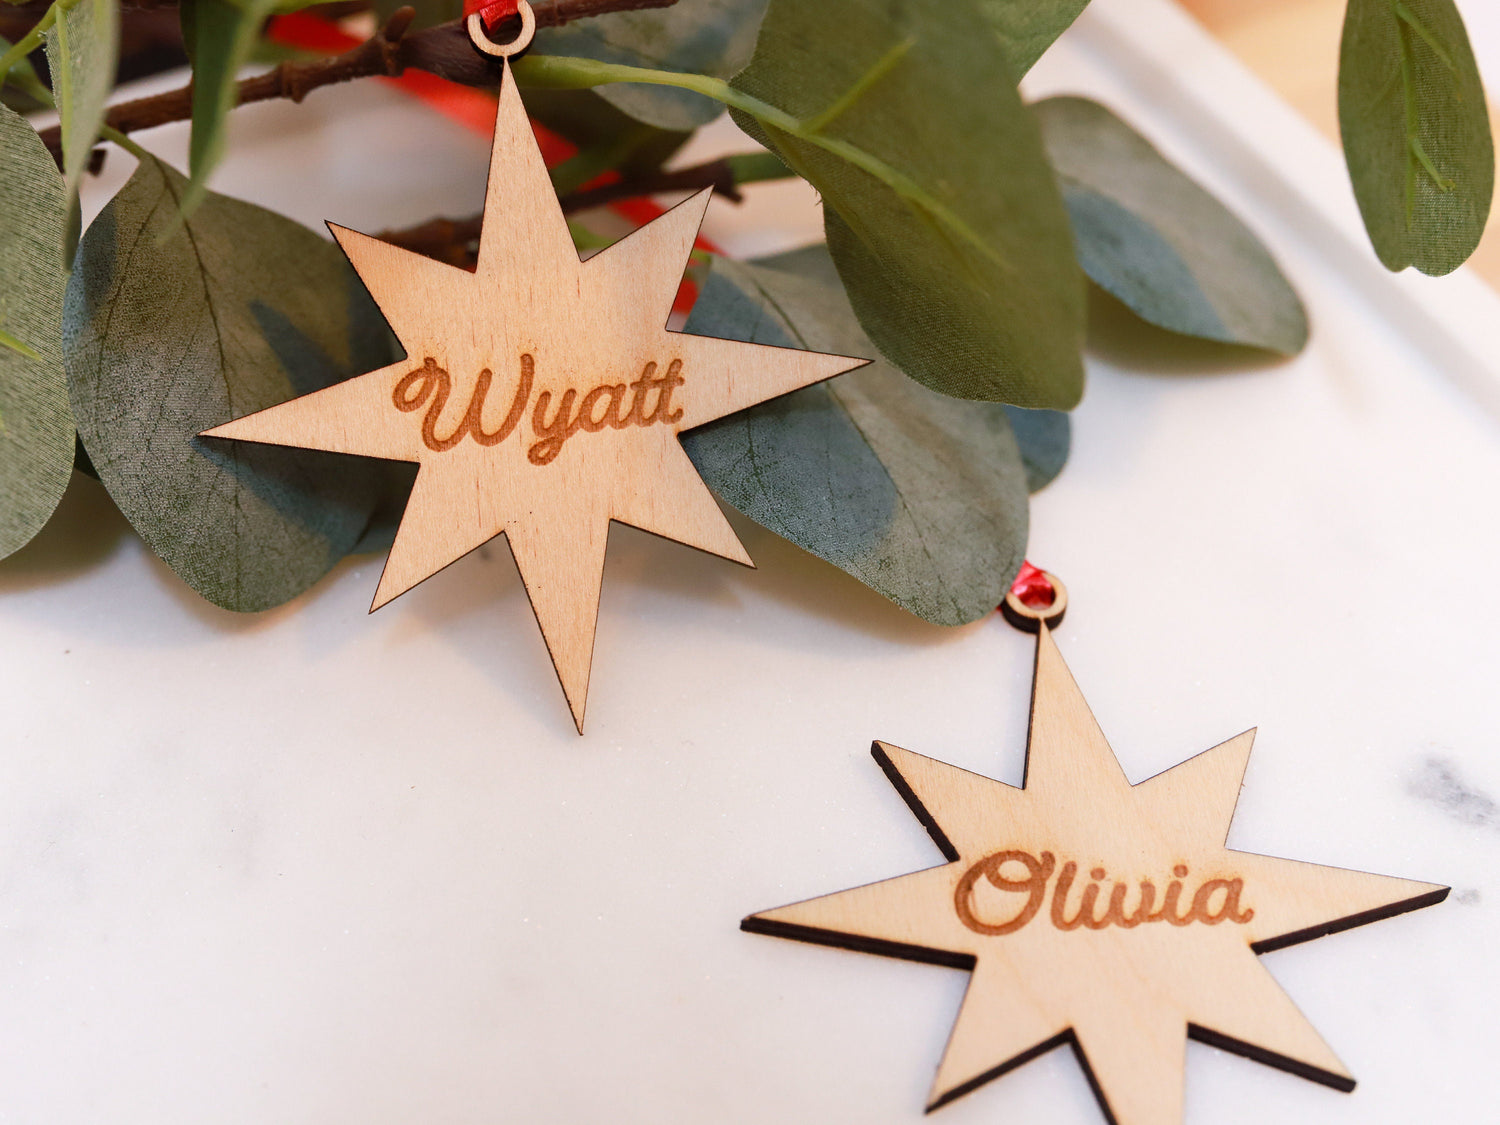 Personalized Engraved Wood Gift Tag with Name - Rustic Christmas Ornament Bauble - Custom Stocking Tag - Wood Place Card